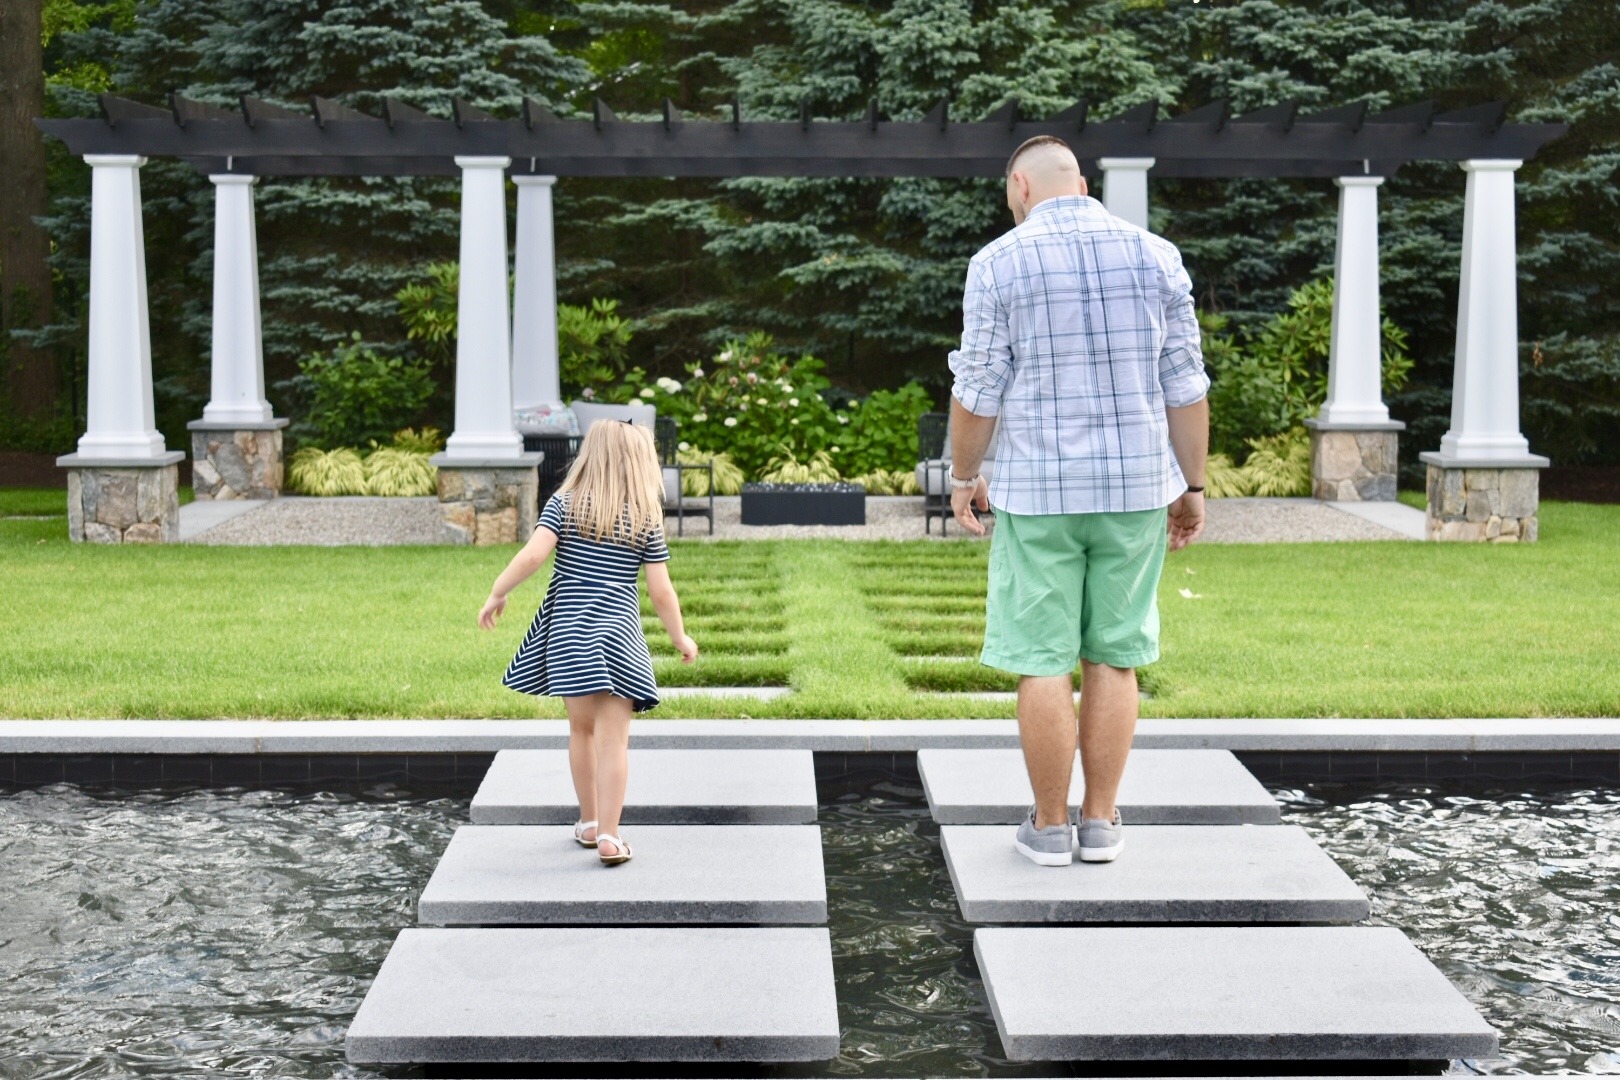 A person and a young child walk on stepping stones across water in a landscaped garden with white pillars and lush greenery in the background.